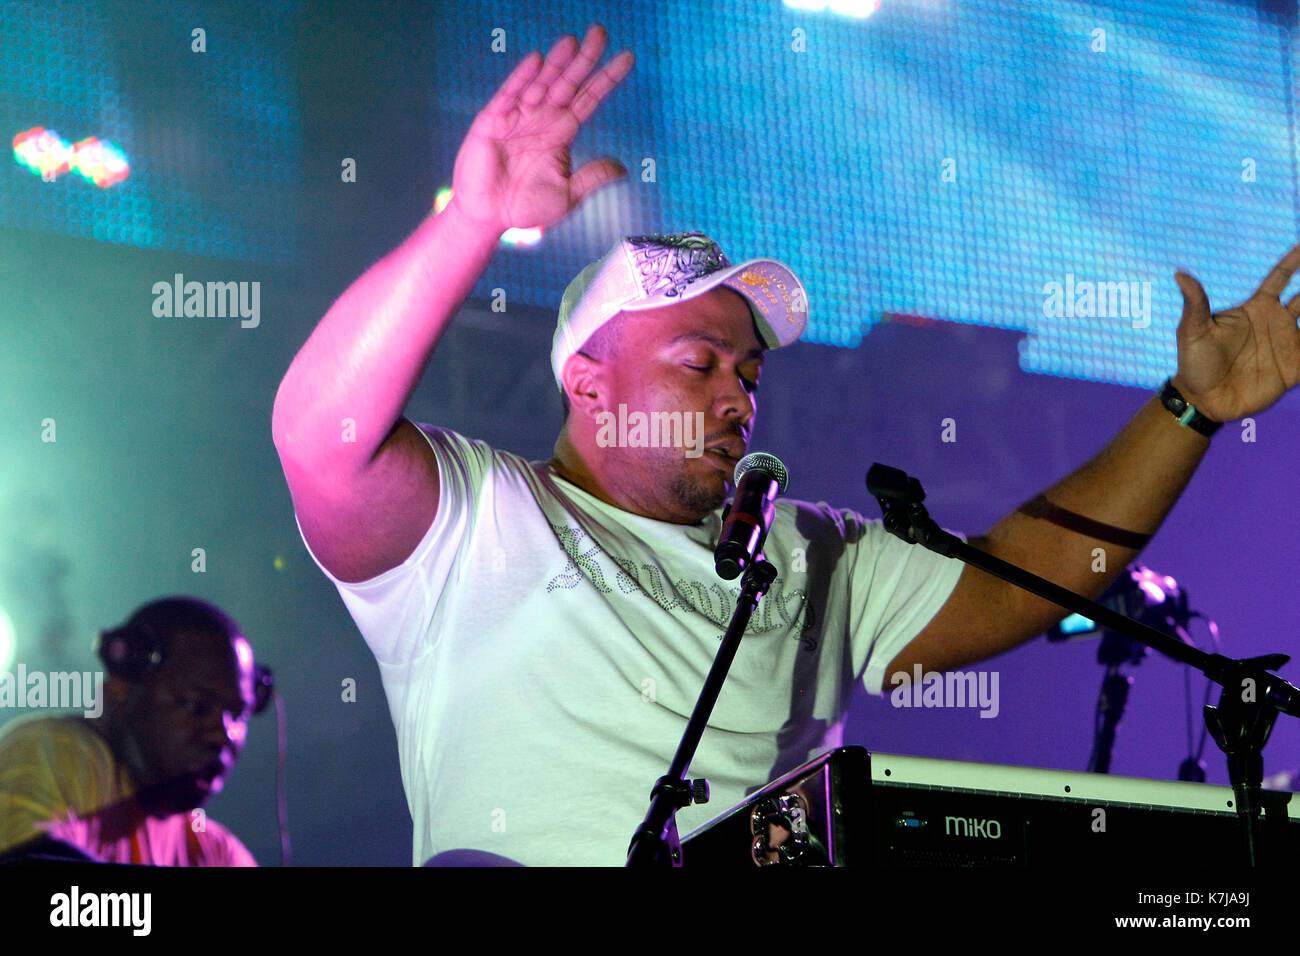 Miami, Florida - March 28 : Timberland- pictured at the Ultra Music Festival  in Bicentennial Park in Miami, Florida on March 28, 2009Credit: Majo  Grossi/MediaPunch Stock Photo - Alamy